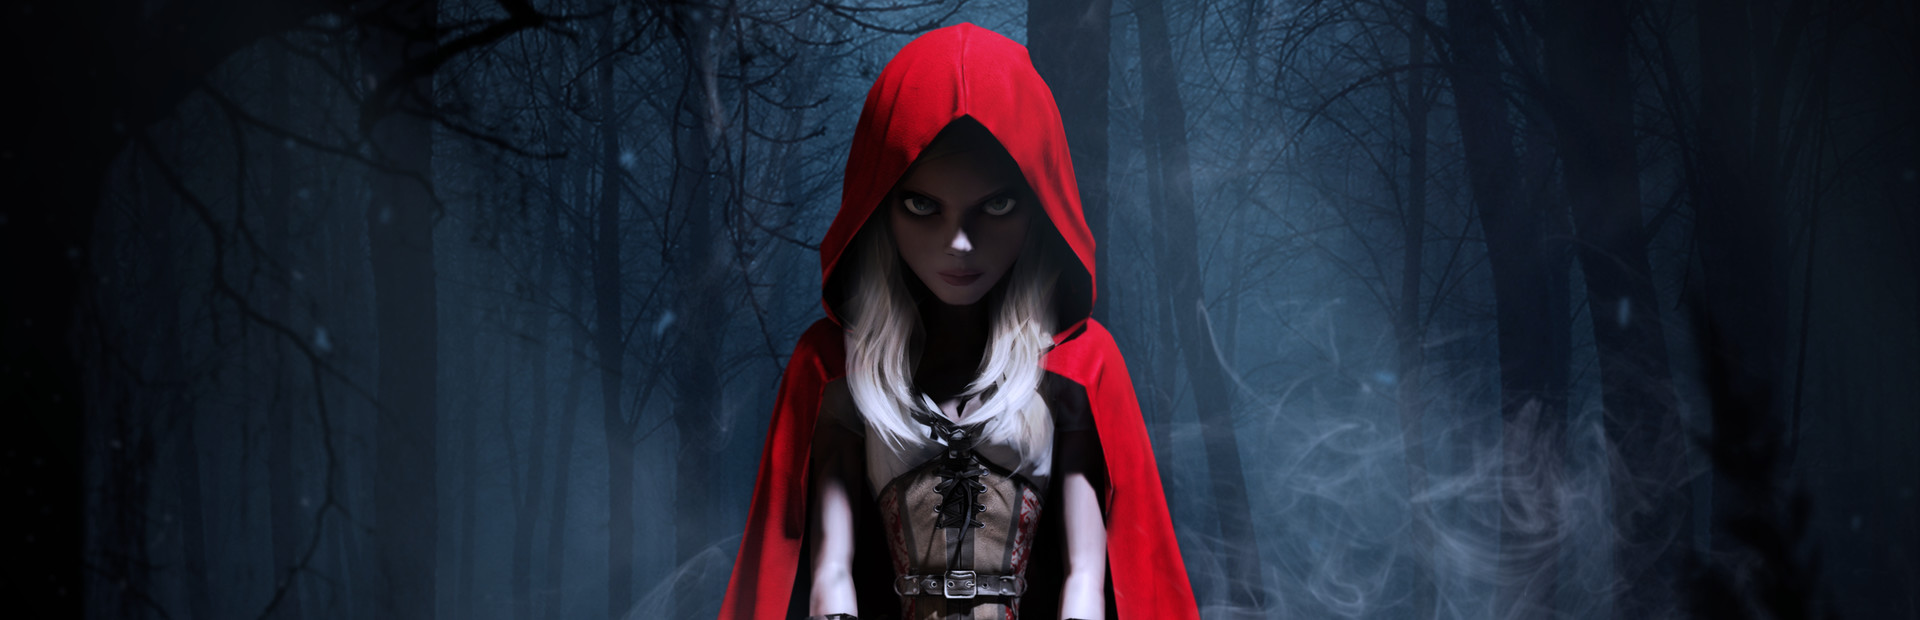 Woolfe - The Red Hood Diaries cover image